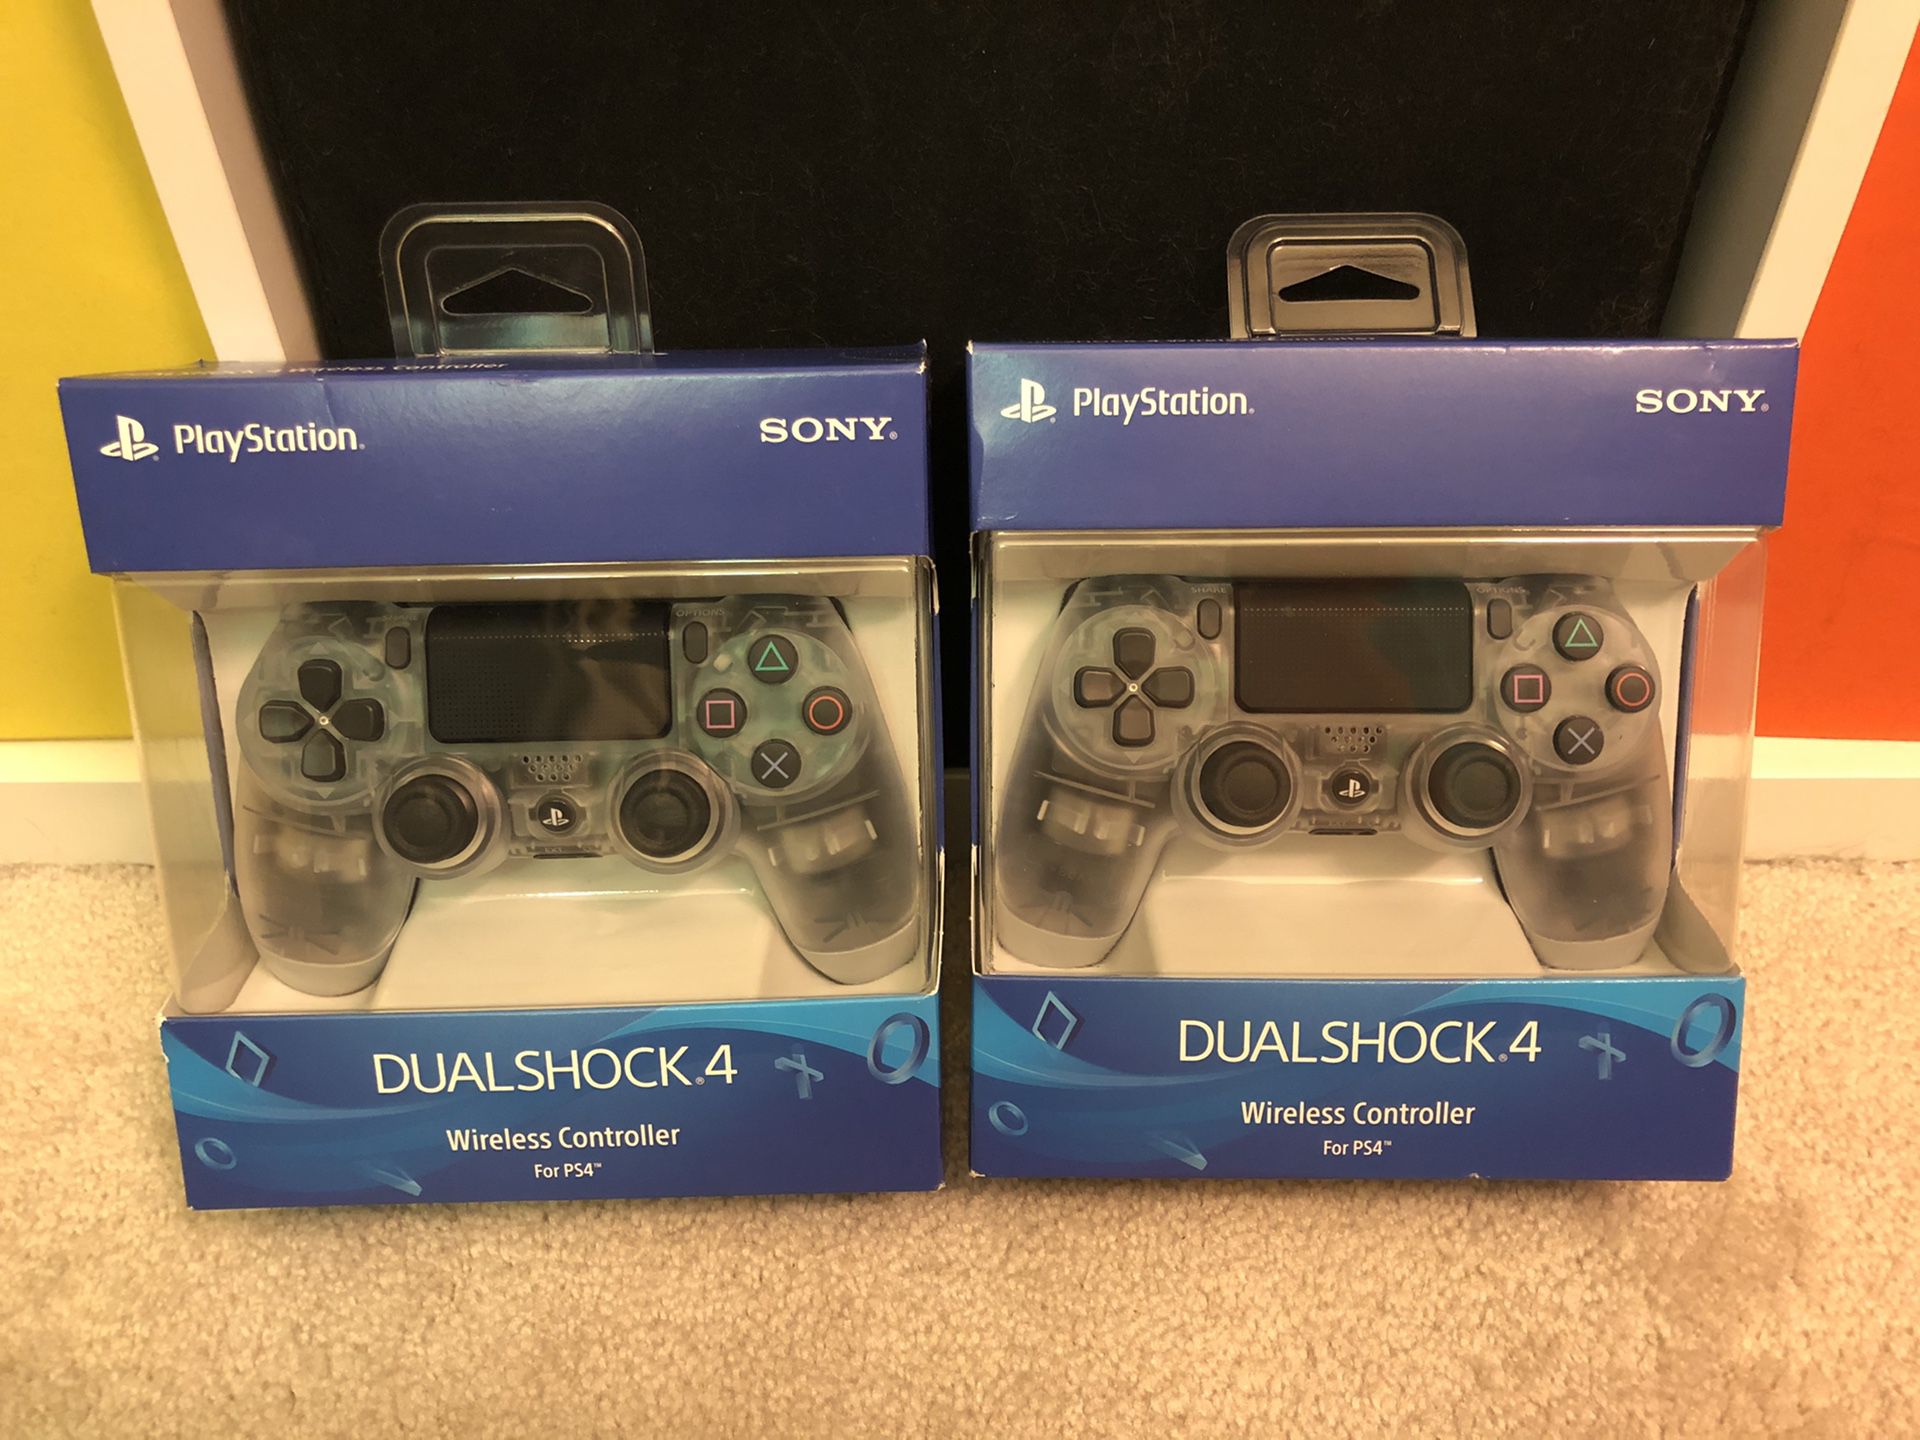 Brand new Sony PlayStation Dual Shock 4 wireless controller for PS4